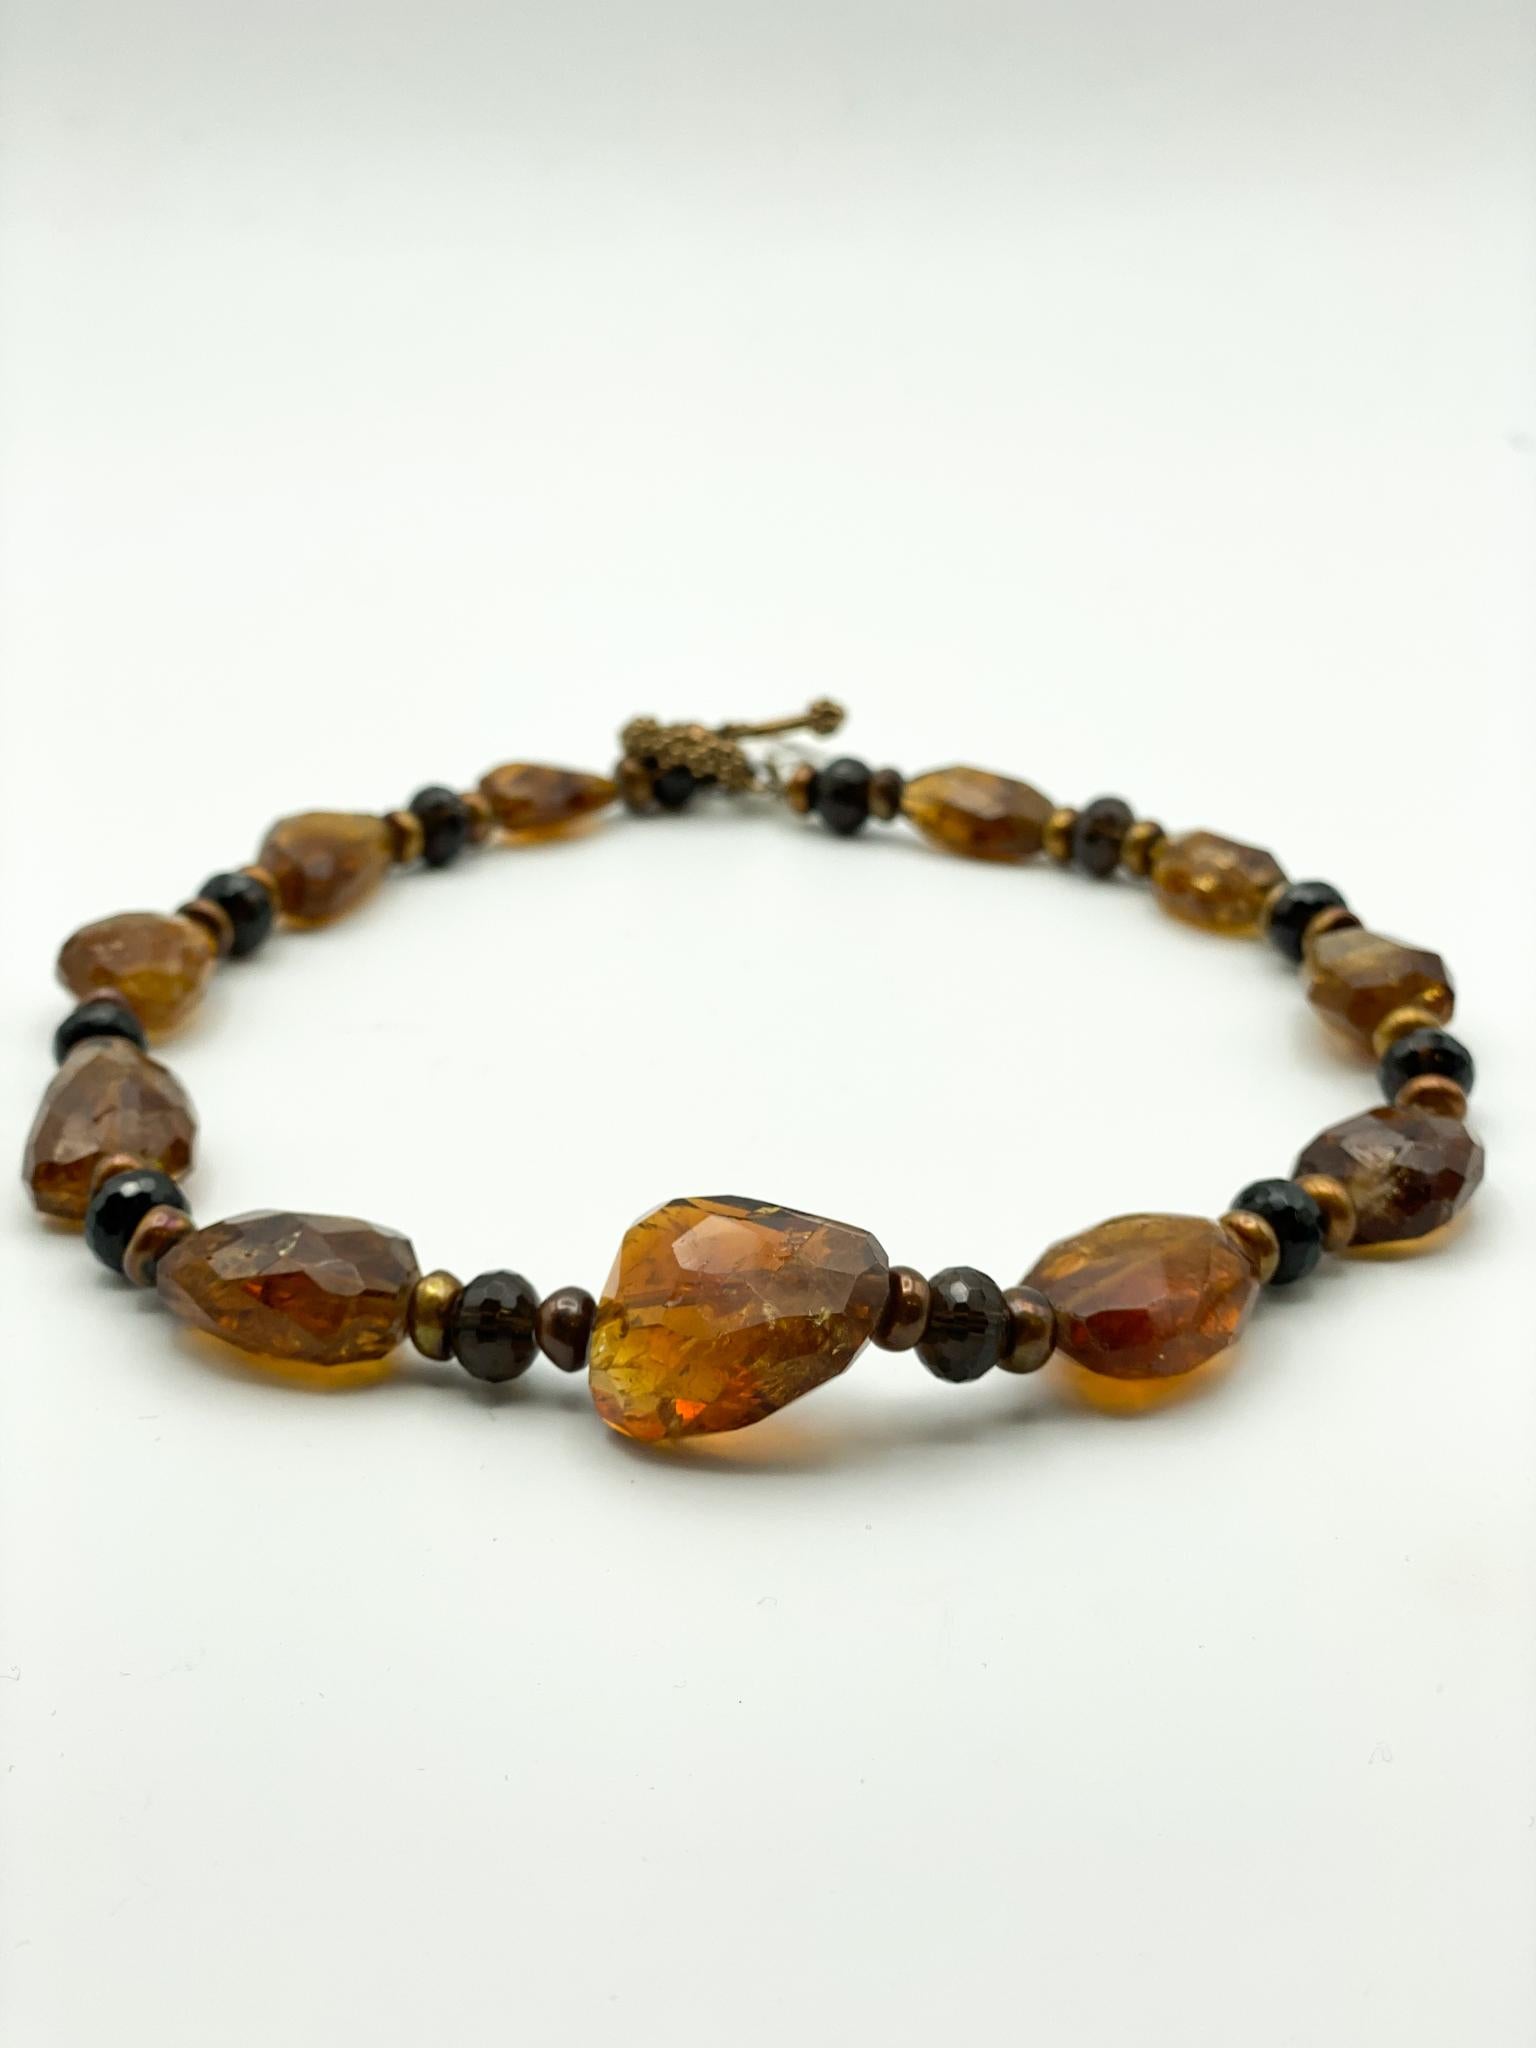 Citrine, Smokey Quartz, Bronze Pearls, 18K Gold Clasp
Beaded, Stone, Necklace
Approximately 18 inches in length/around. 